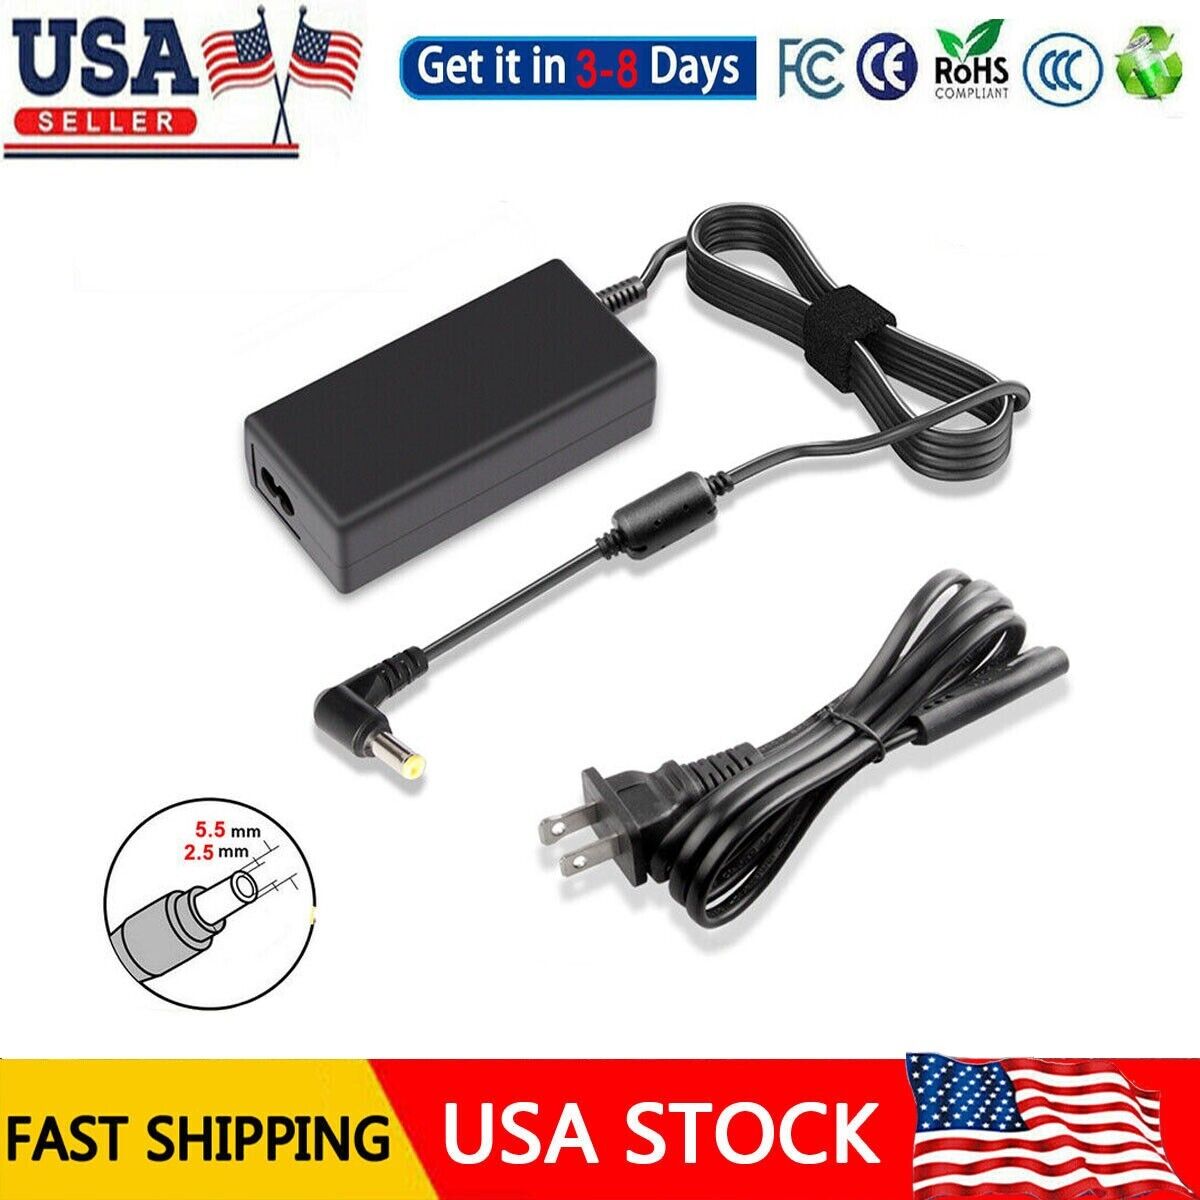 19V 3.42A 65W AC Adapter Charger For Toshiba Laptop Power Supply Cord Cable